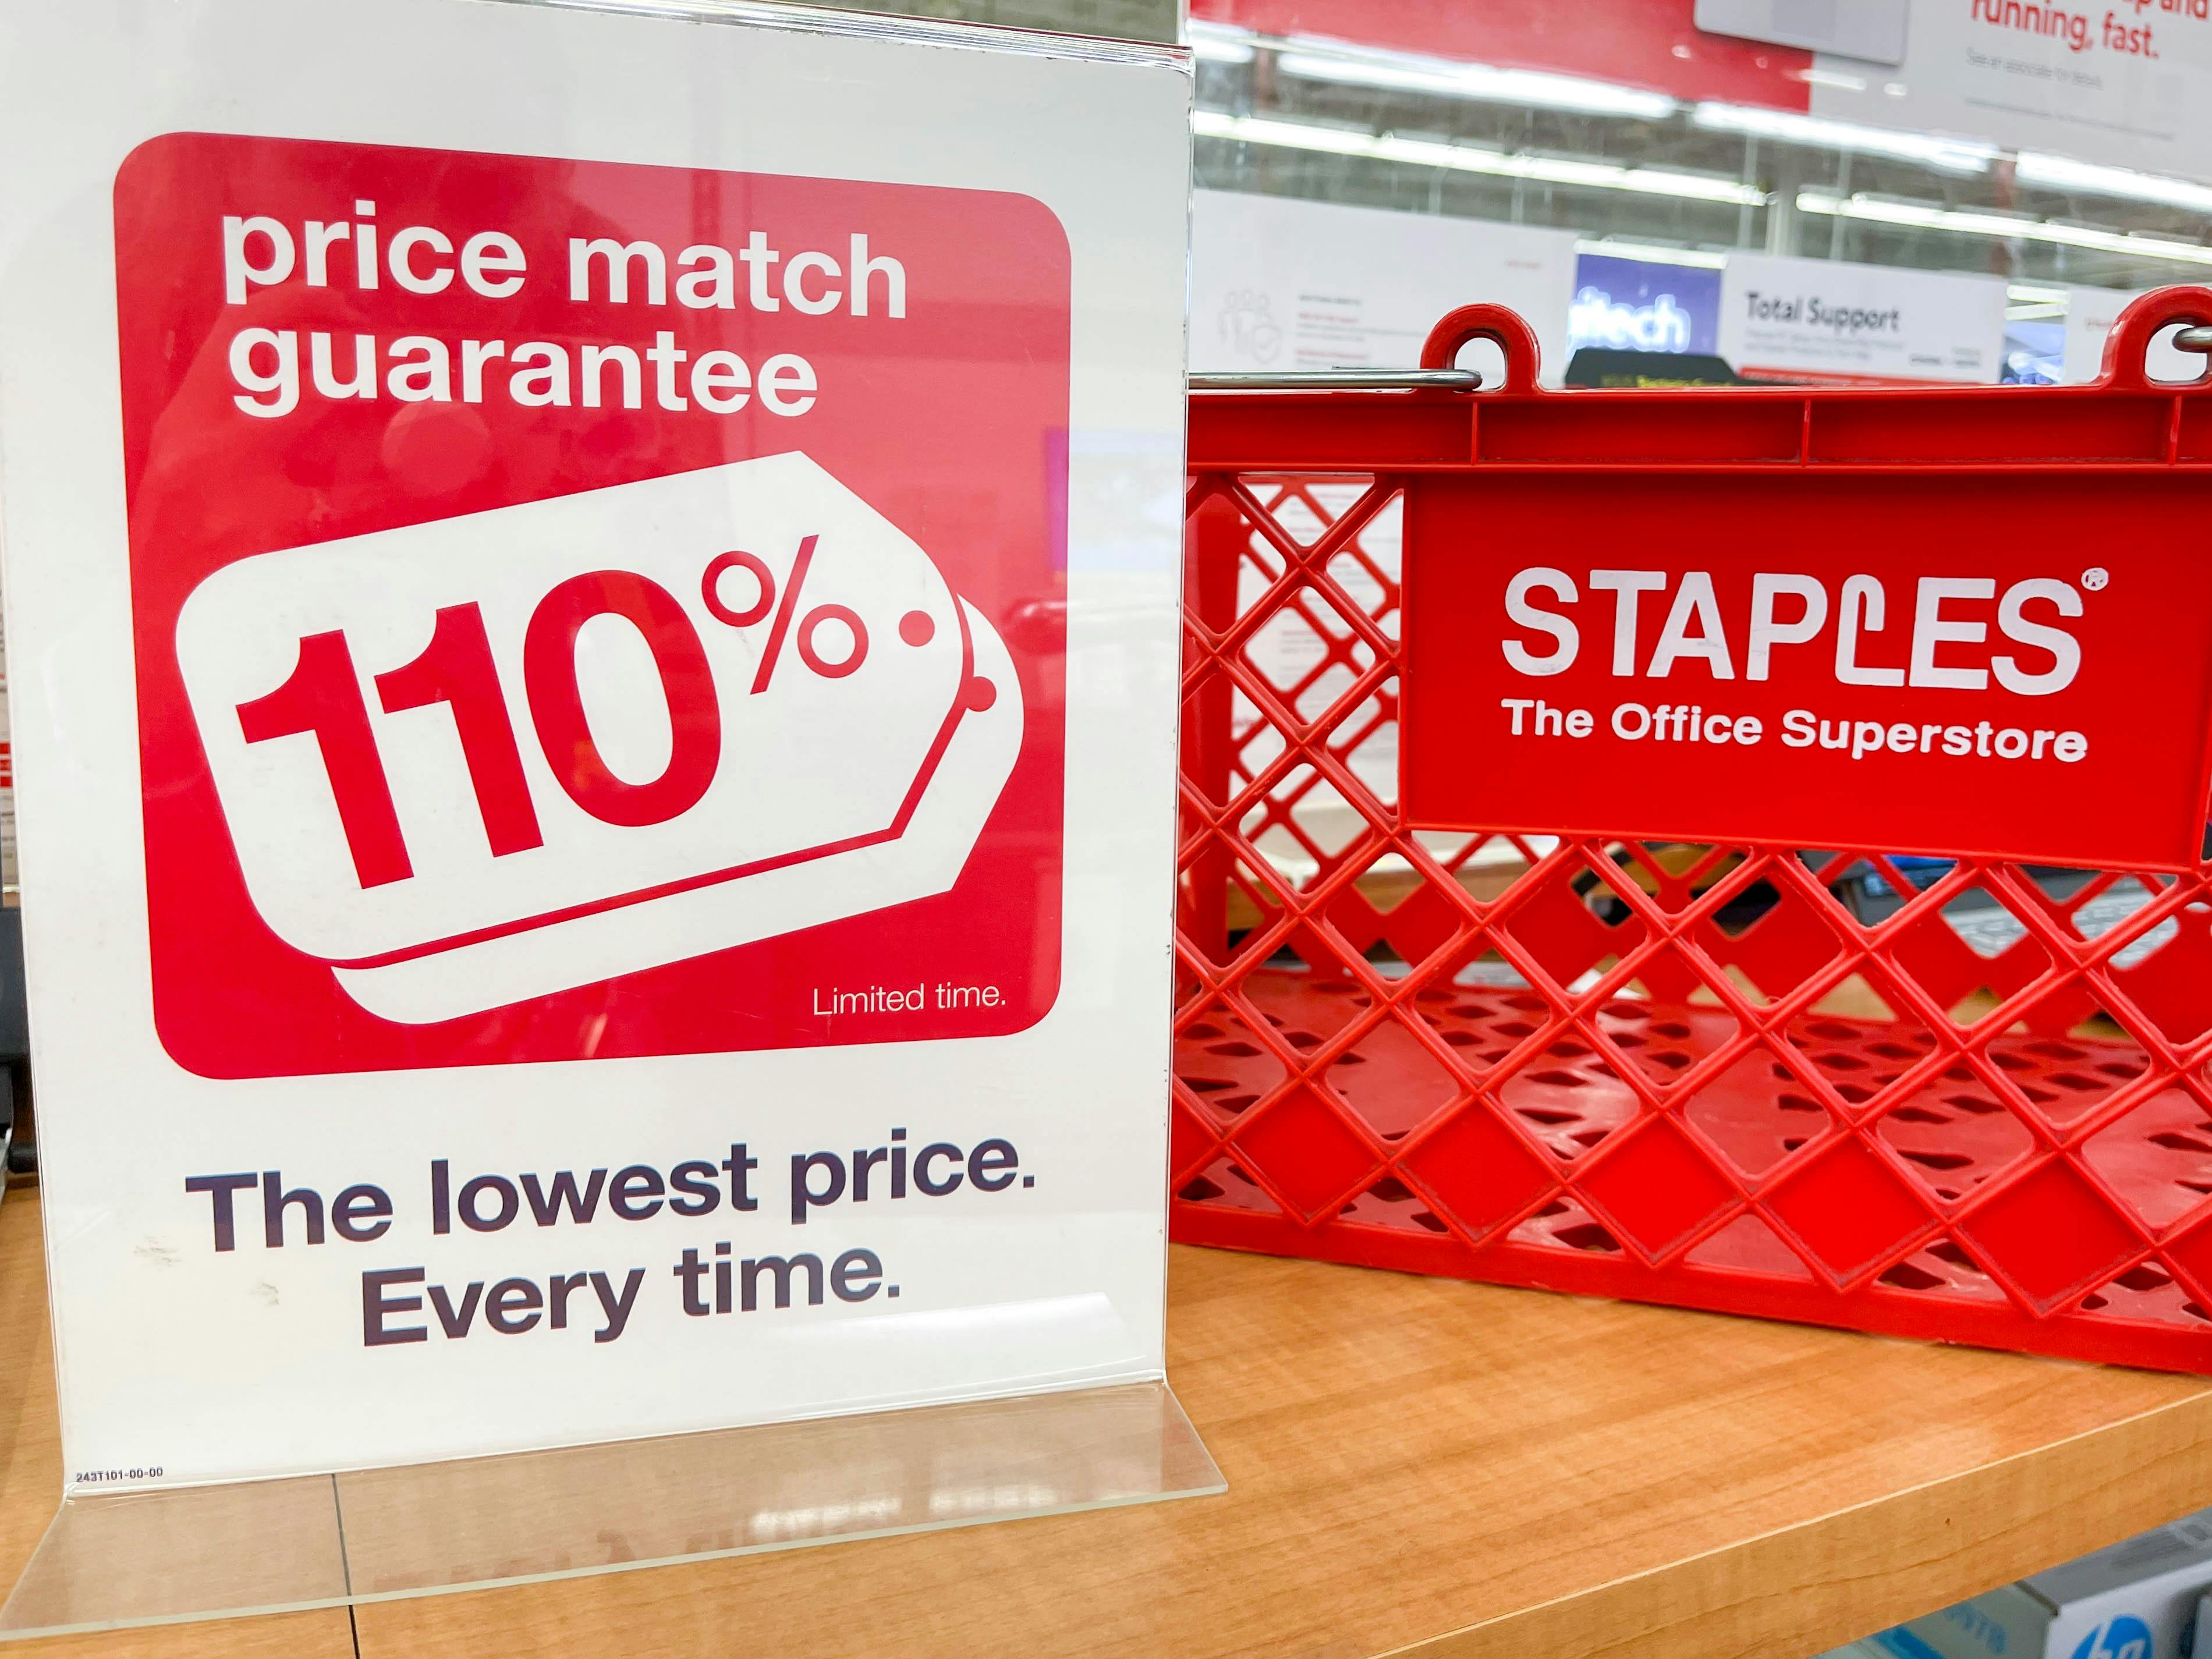 price match guarantee signage in front of staples basket